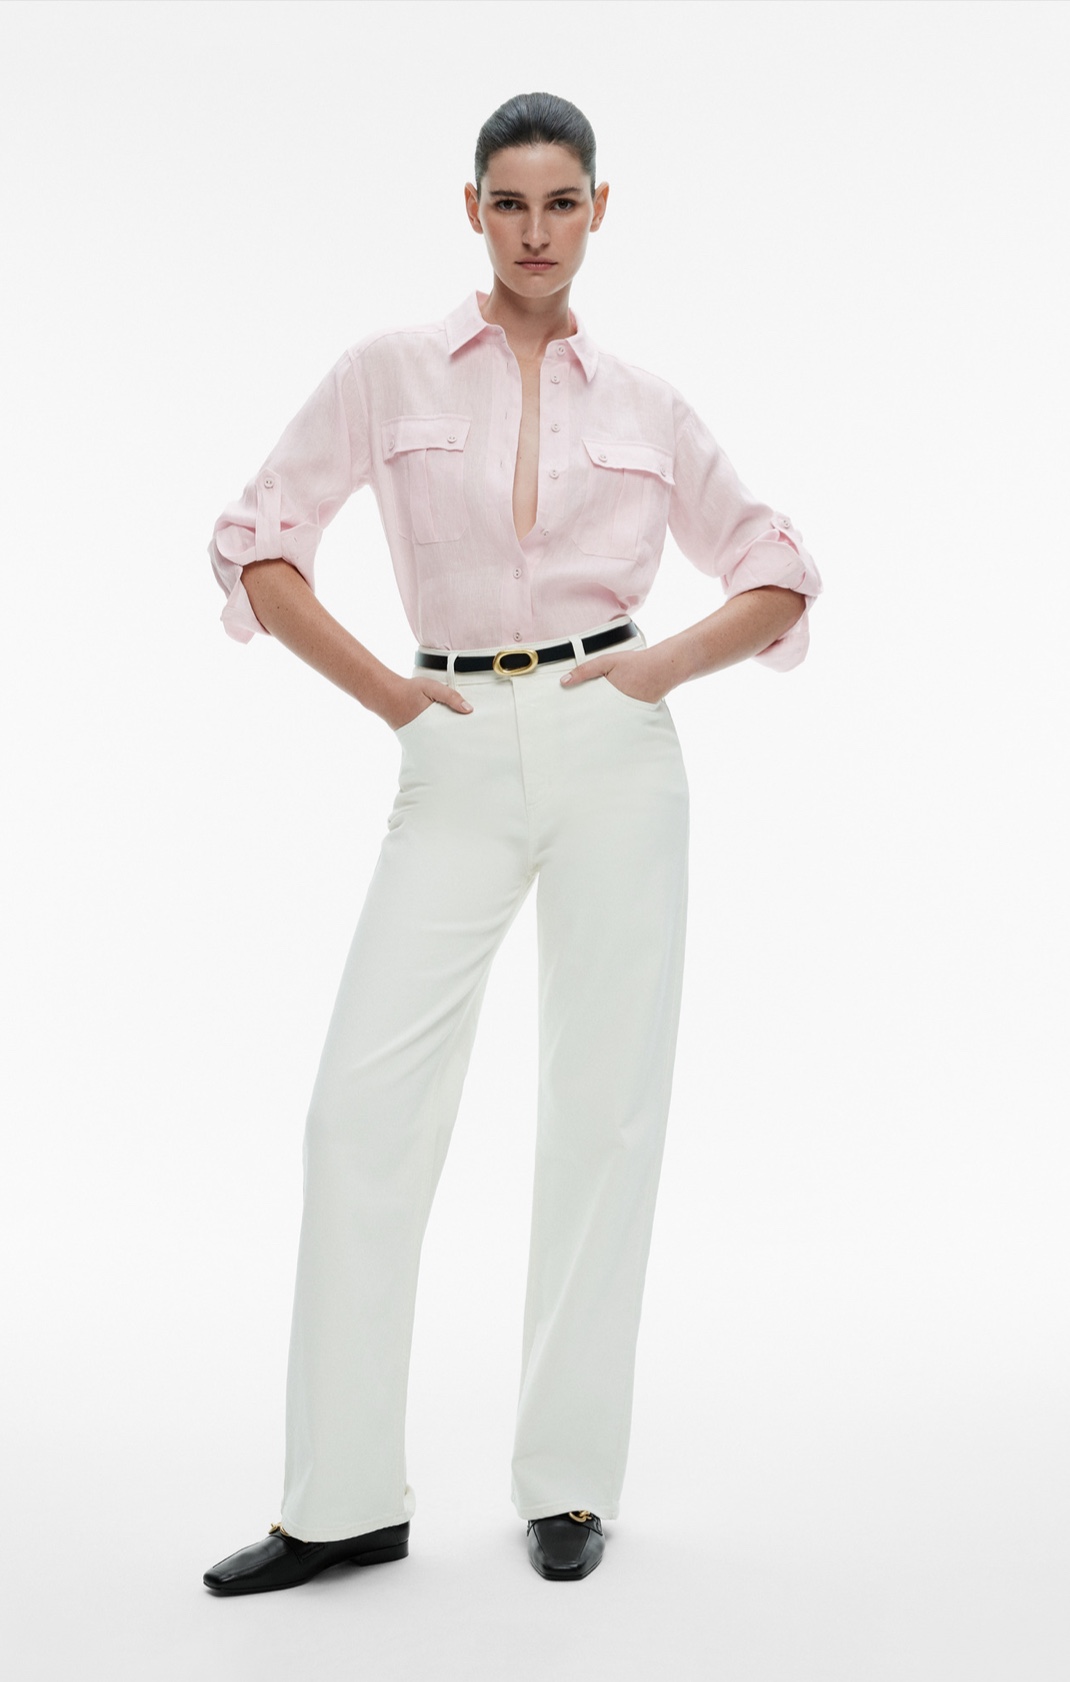 Why you should own a white linen blouse